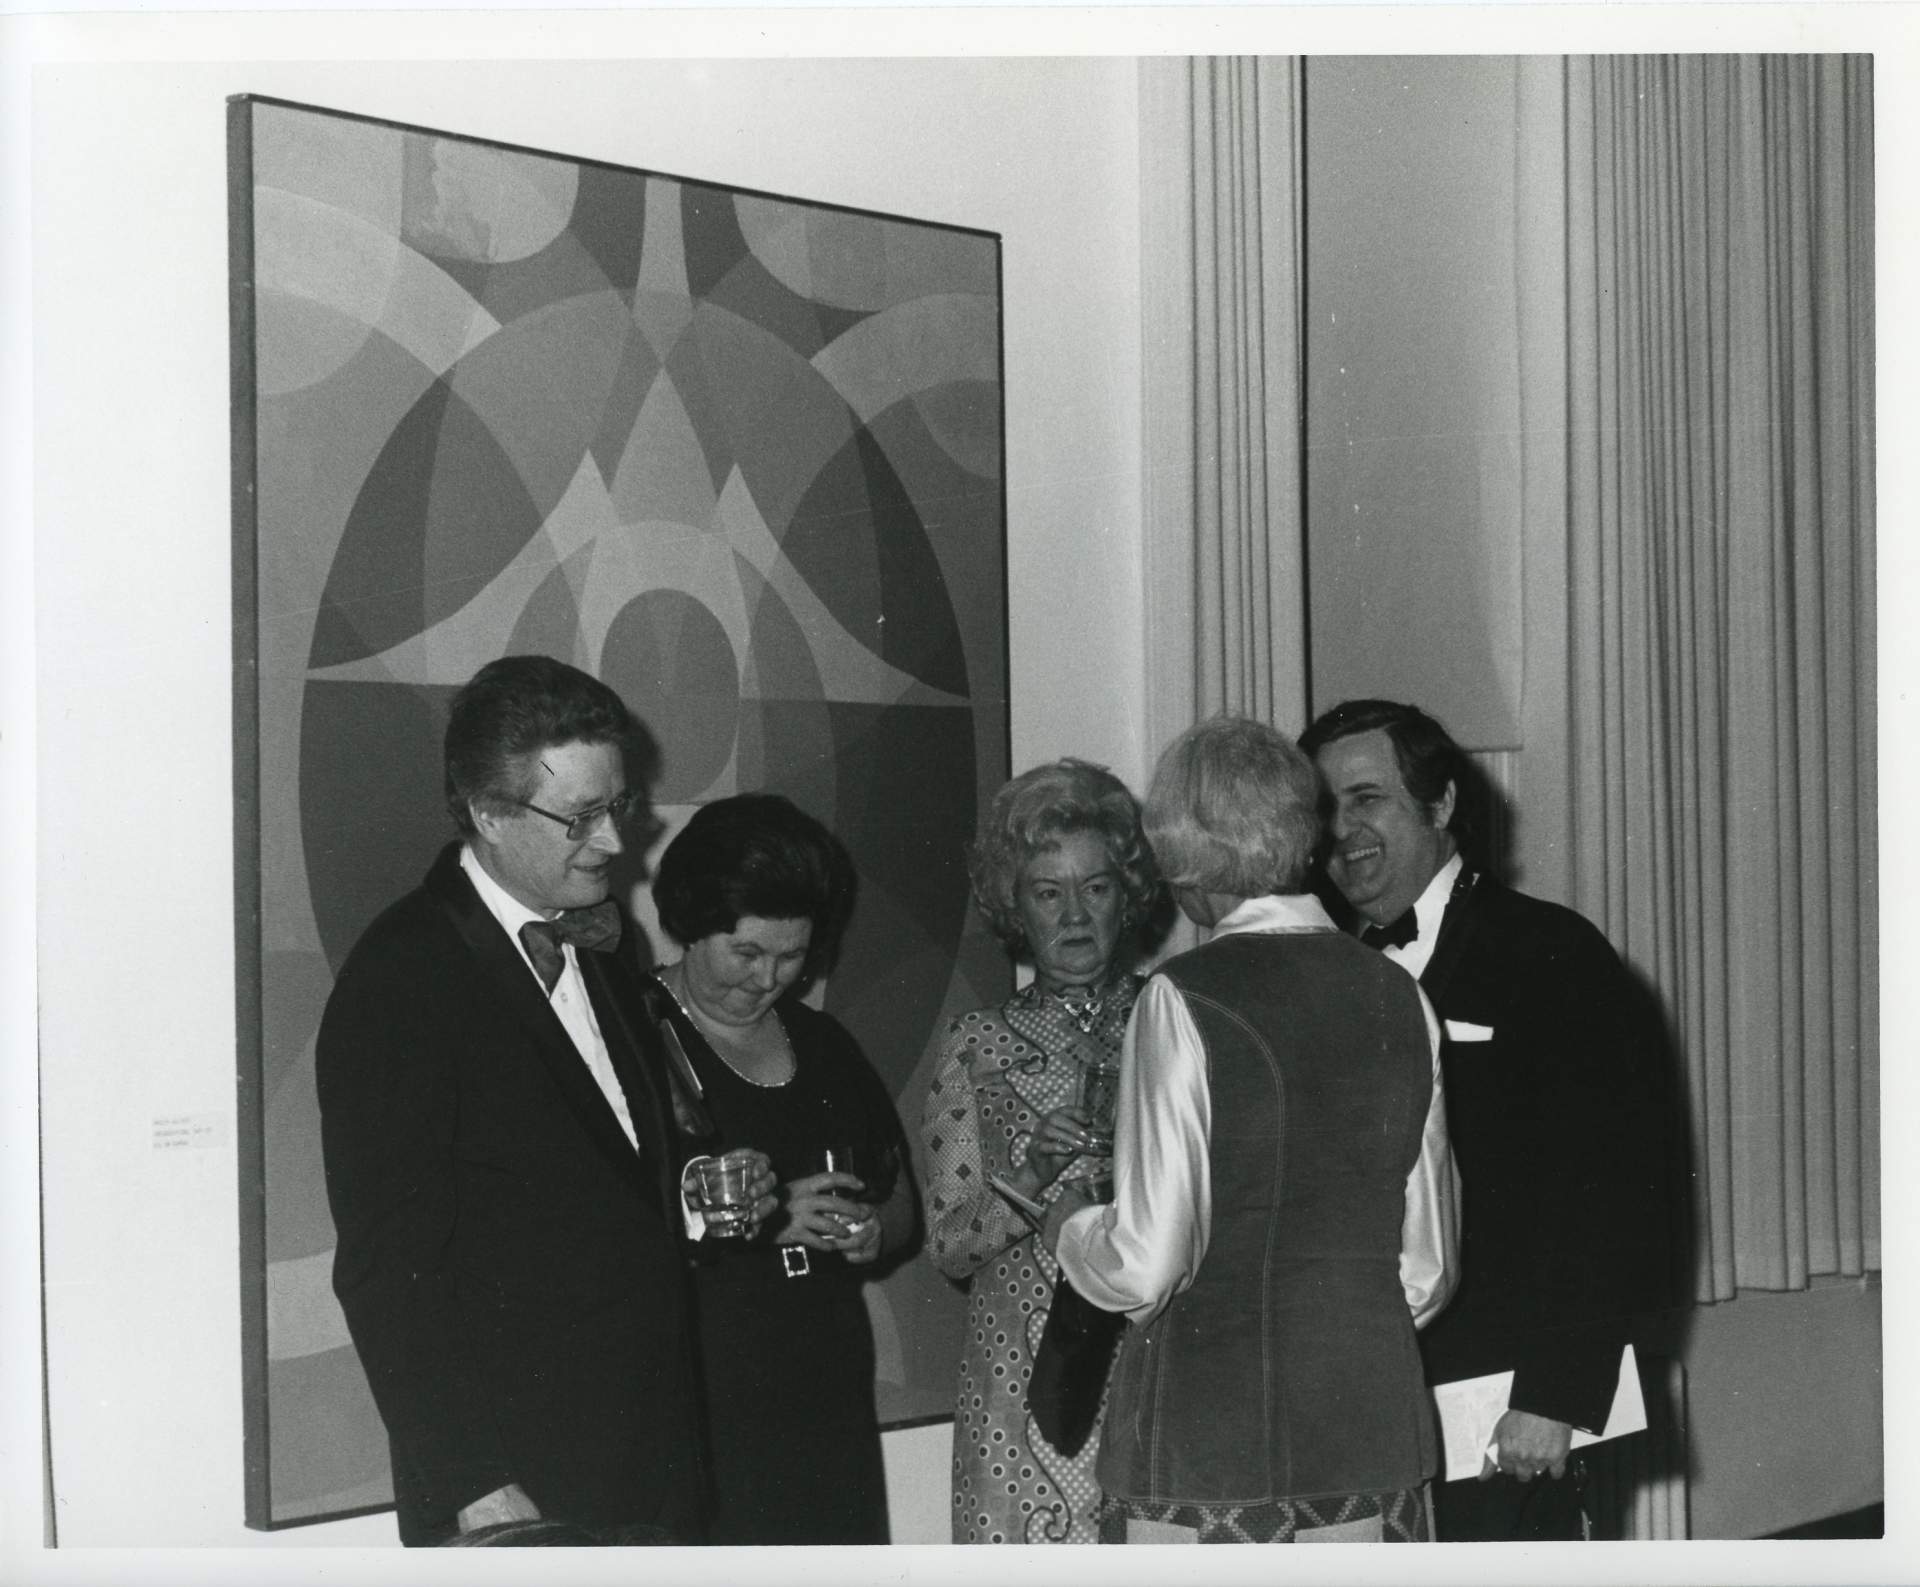 Dr. Ben Townsend, far left. Others unknown. "The First Decade" event, 12/10/1976